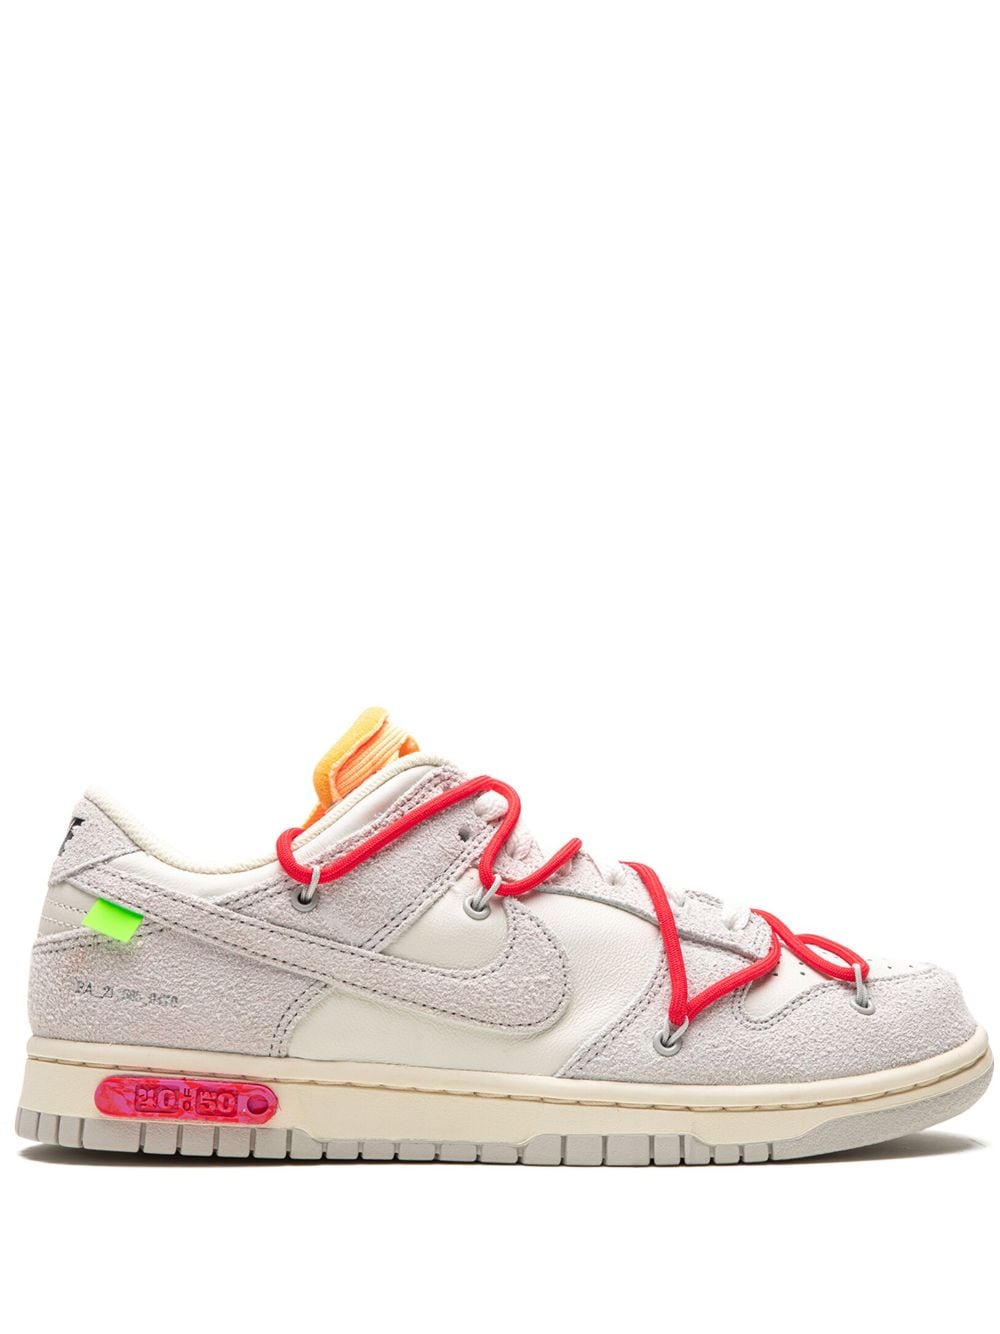 Shop Nike Dunk Low "off-white